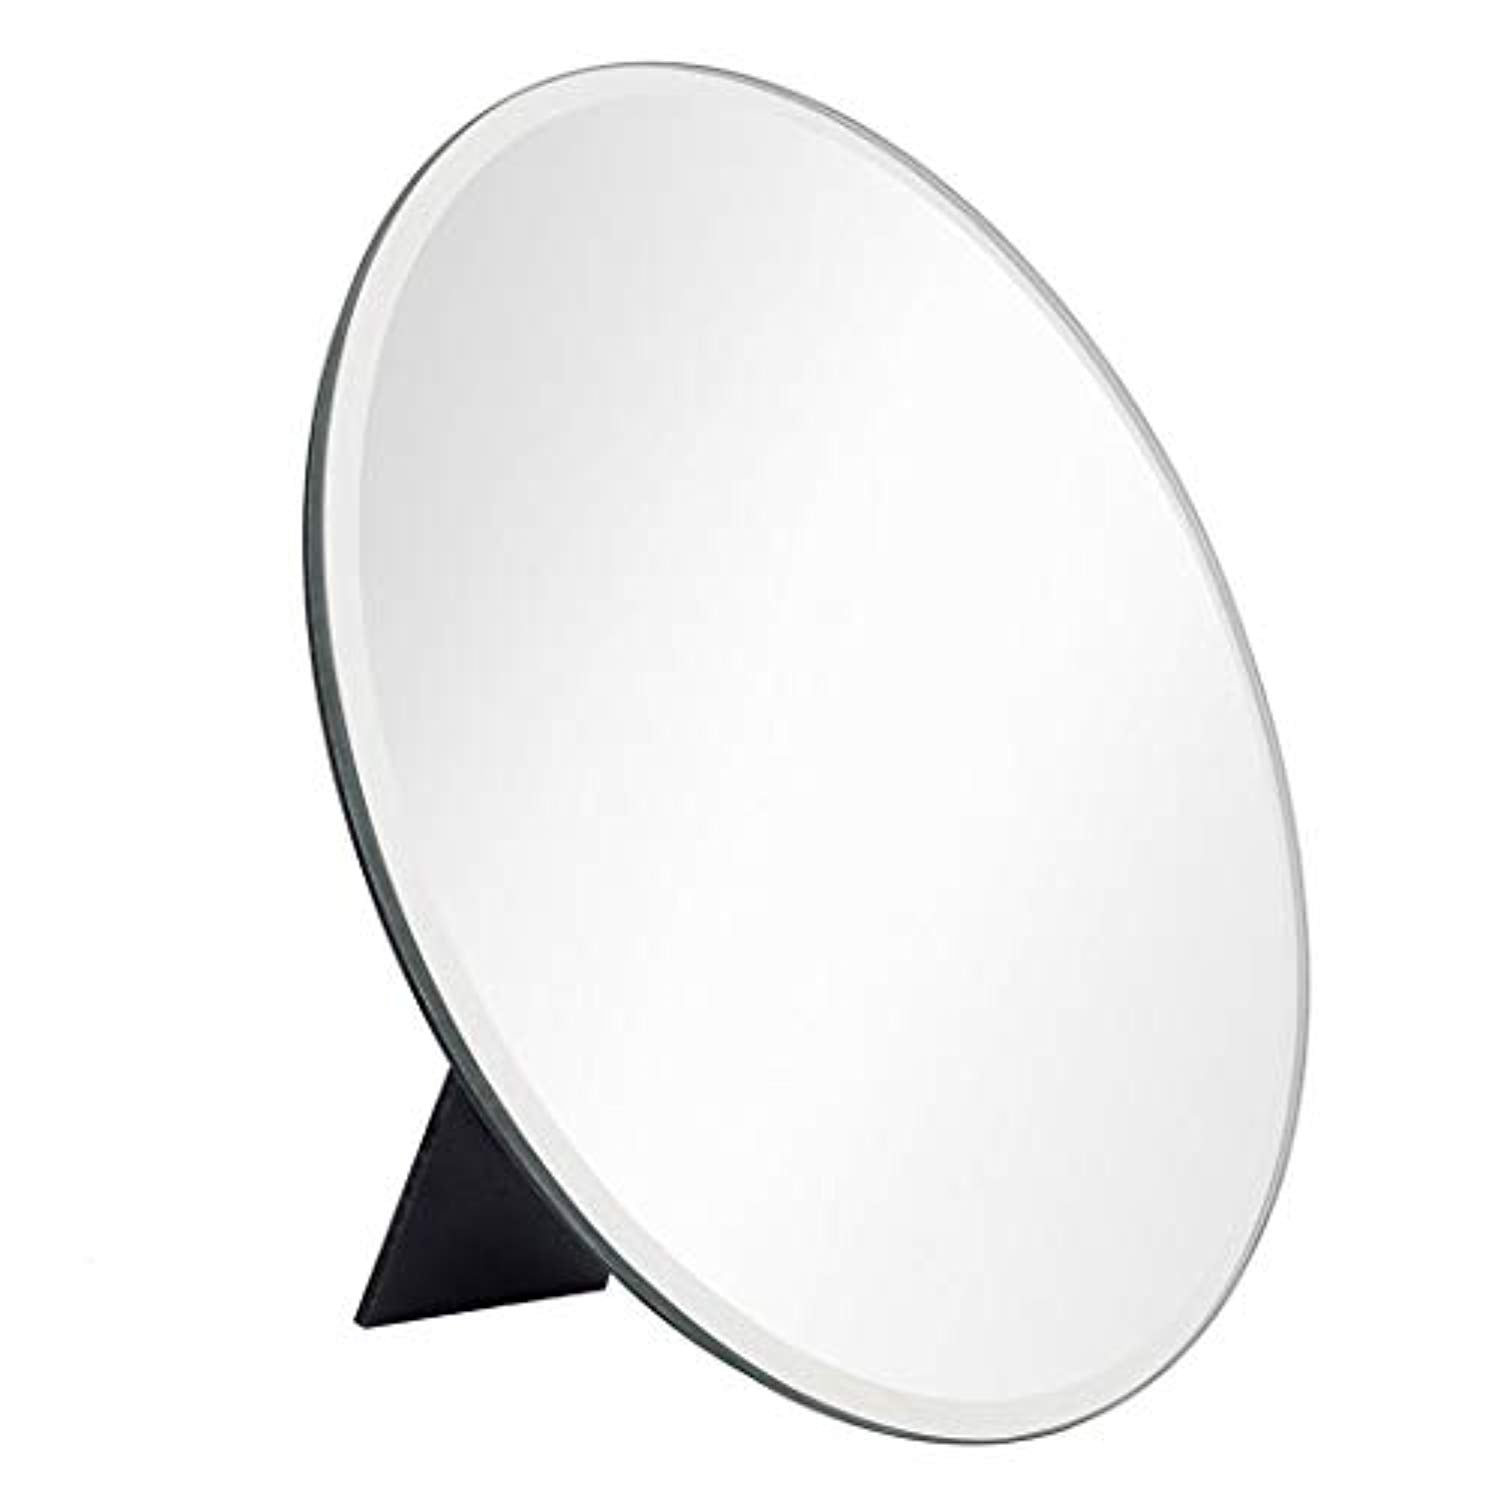 Andy Star Desk Mirror For Makeup Small Round Mirror Wall Mounted